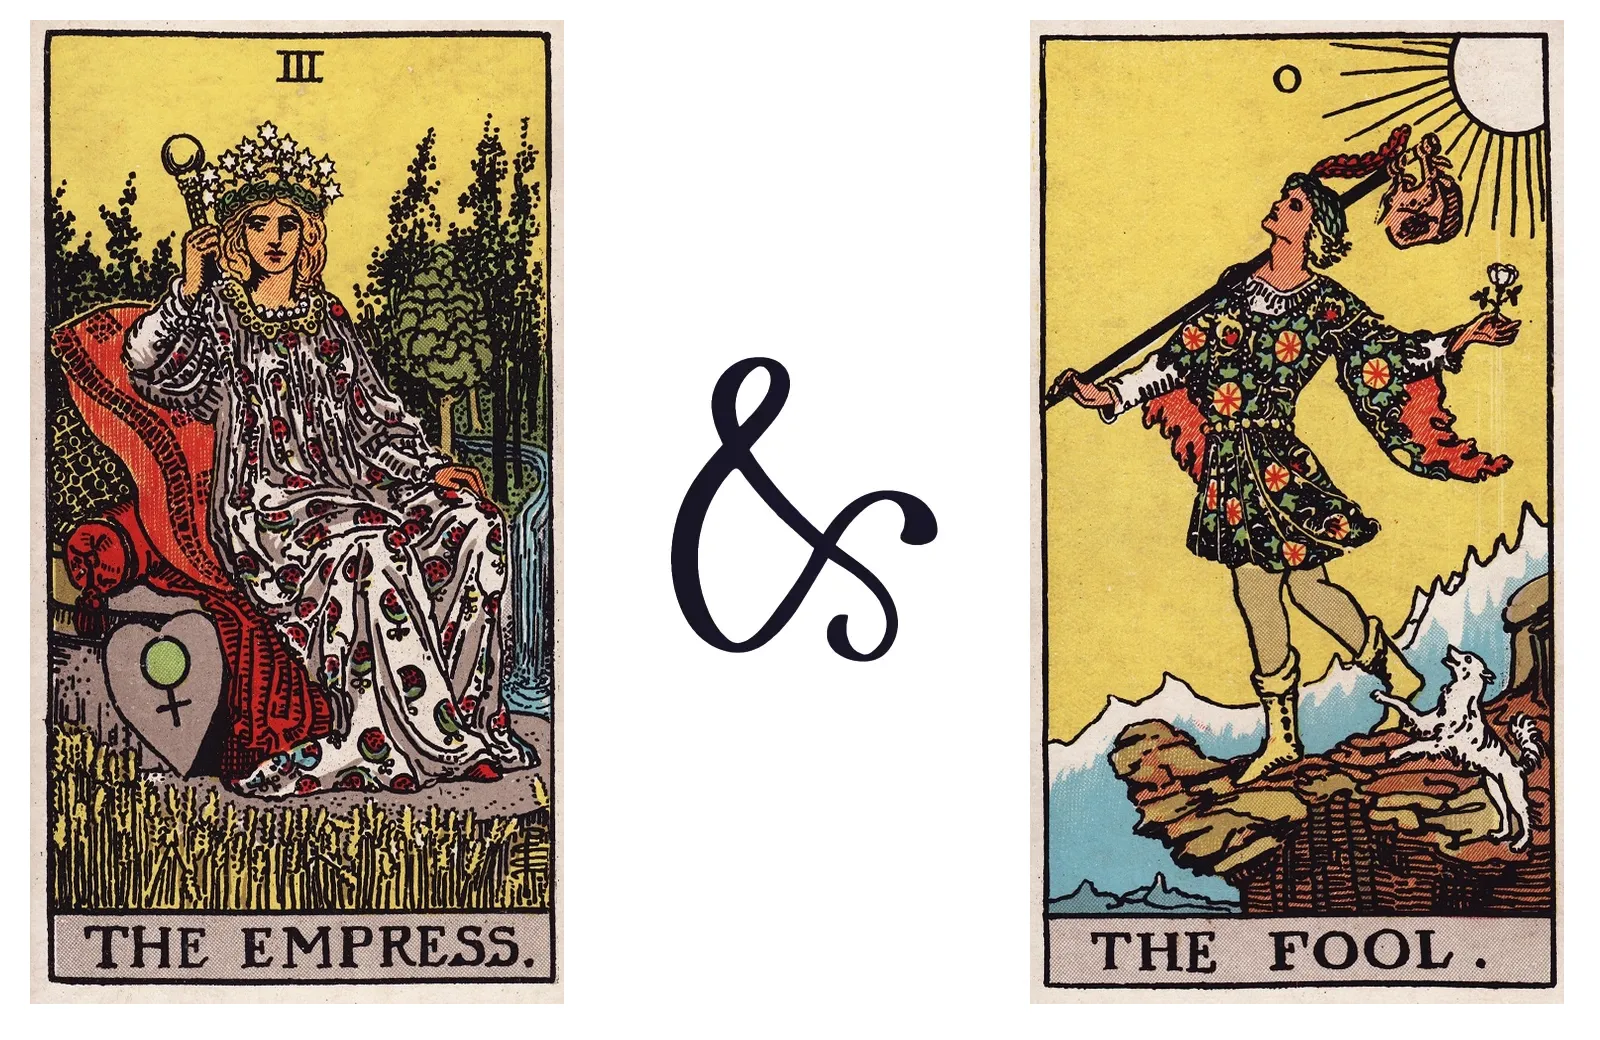 The Empress and The Fool